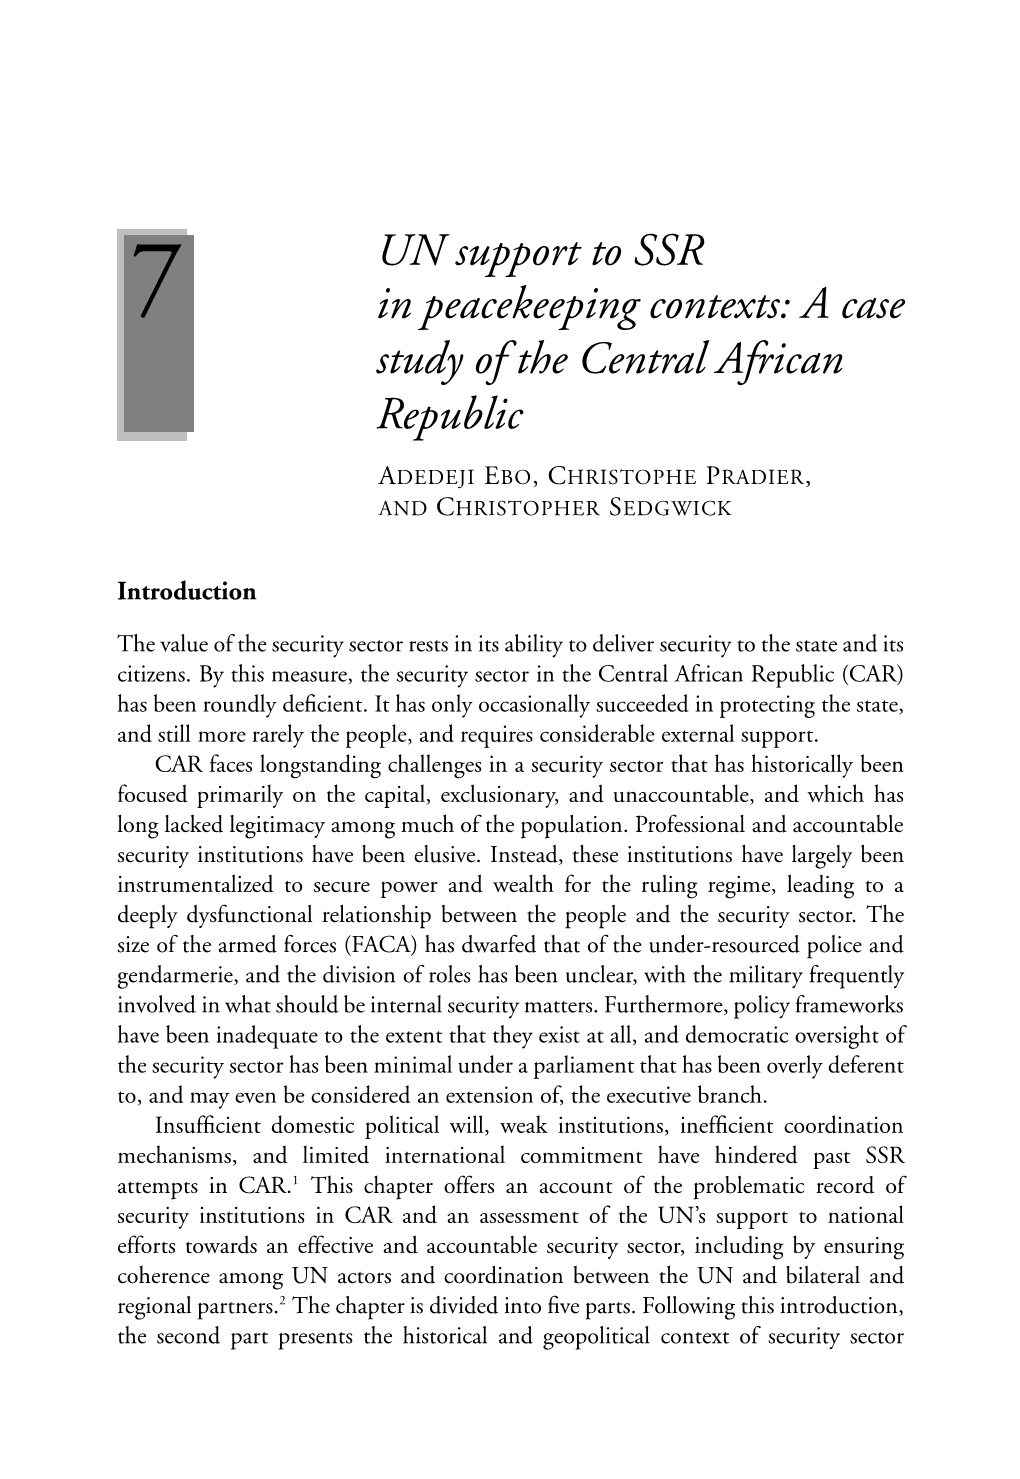 UN Support to SSR in Peacekeeping Contexts: a Case Study of the Central African Republic